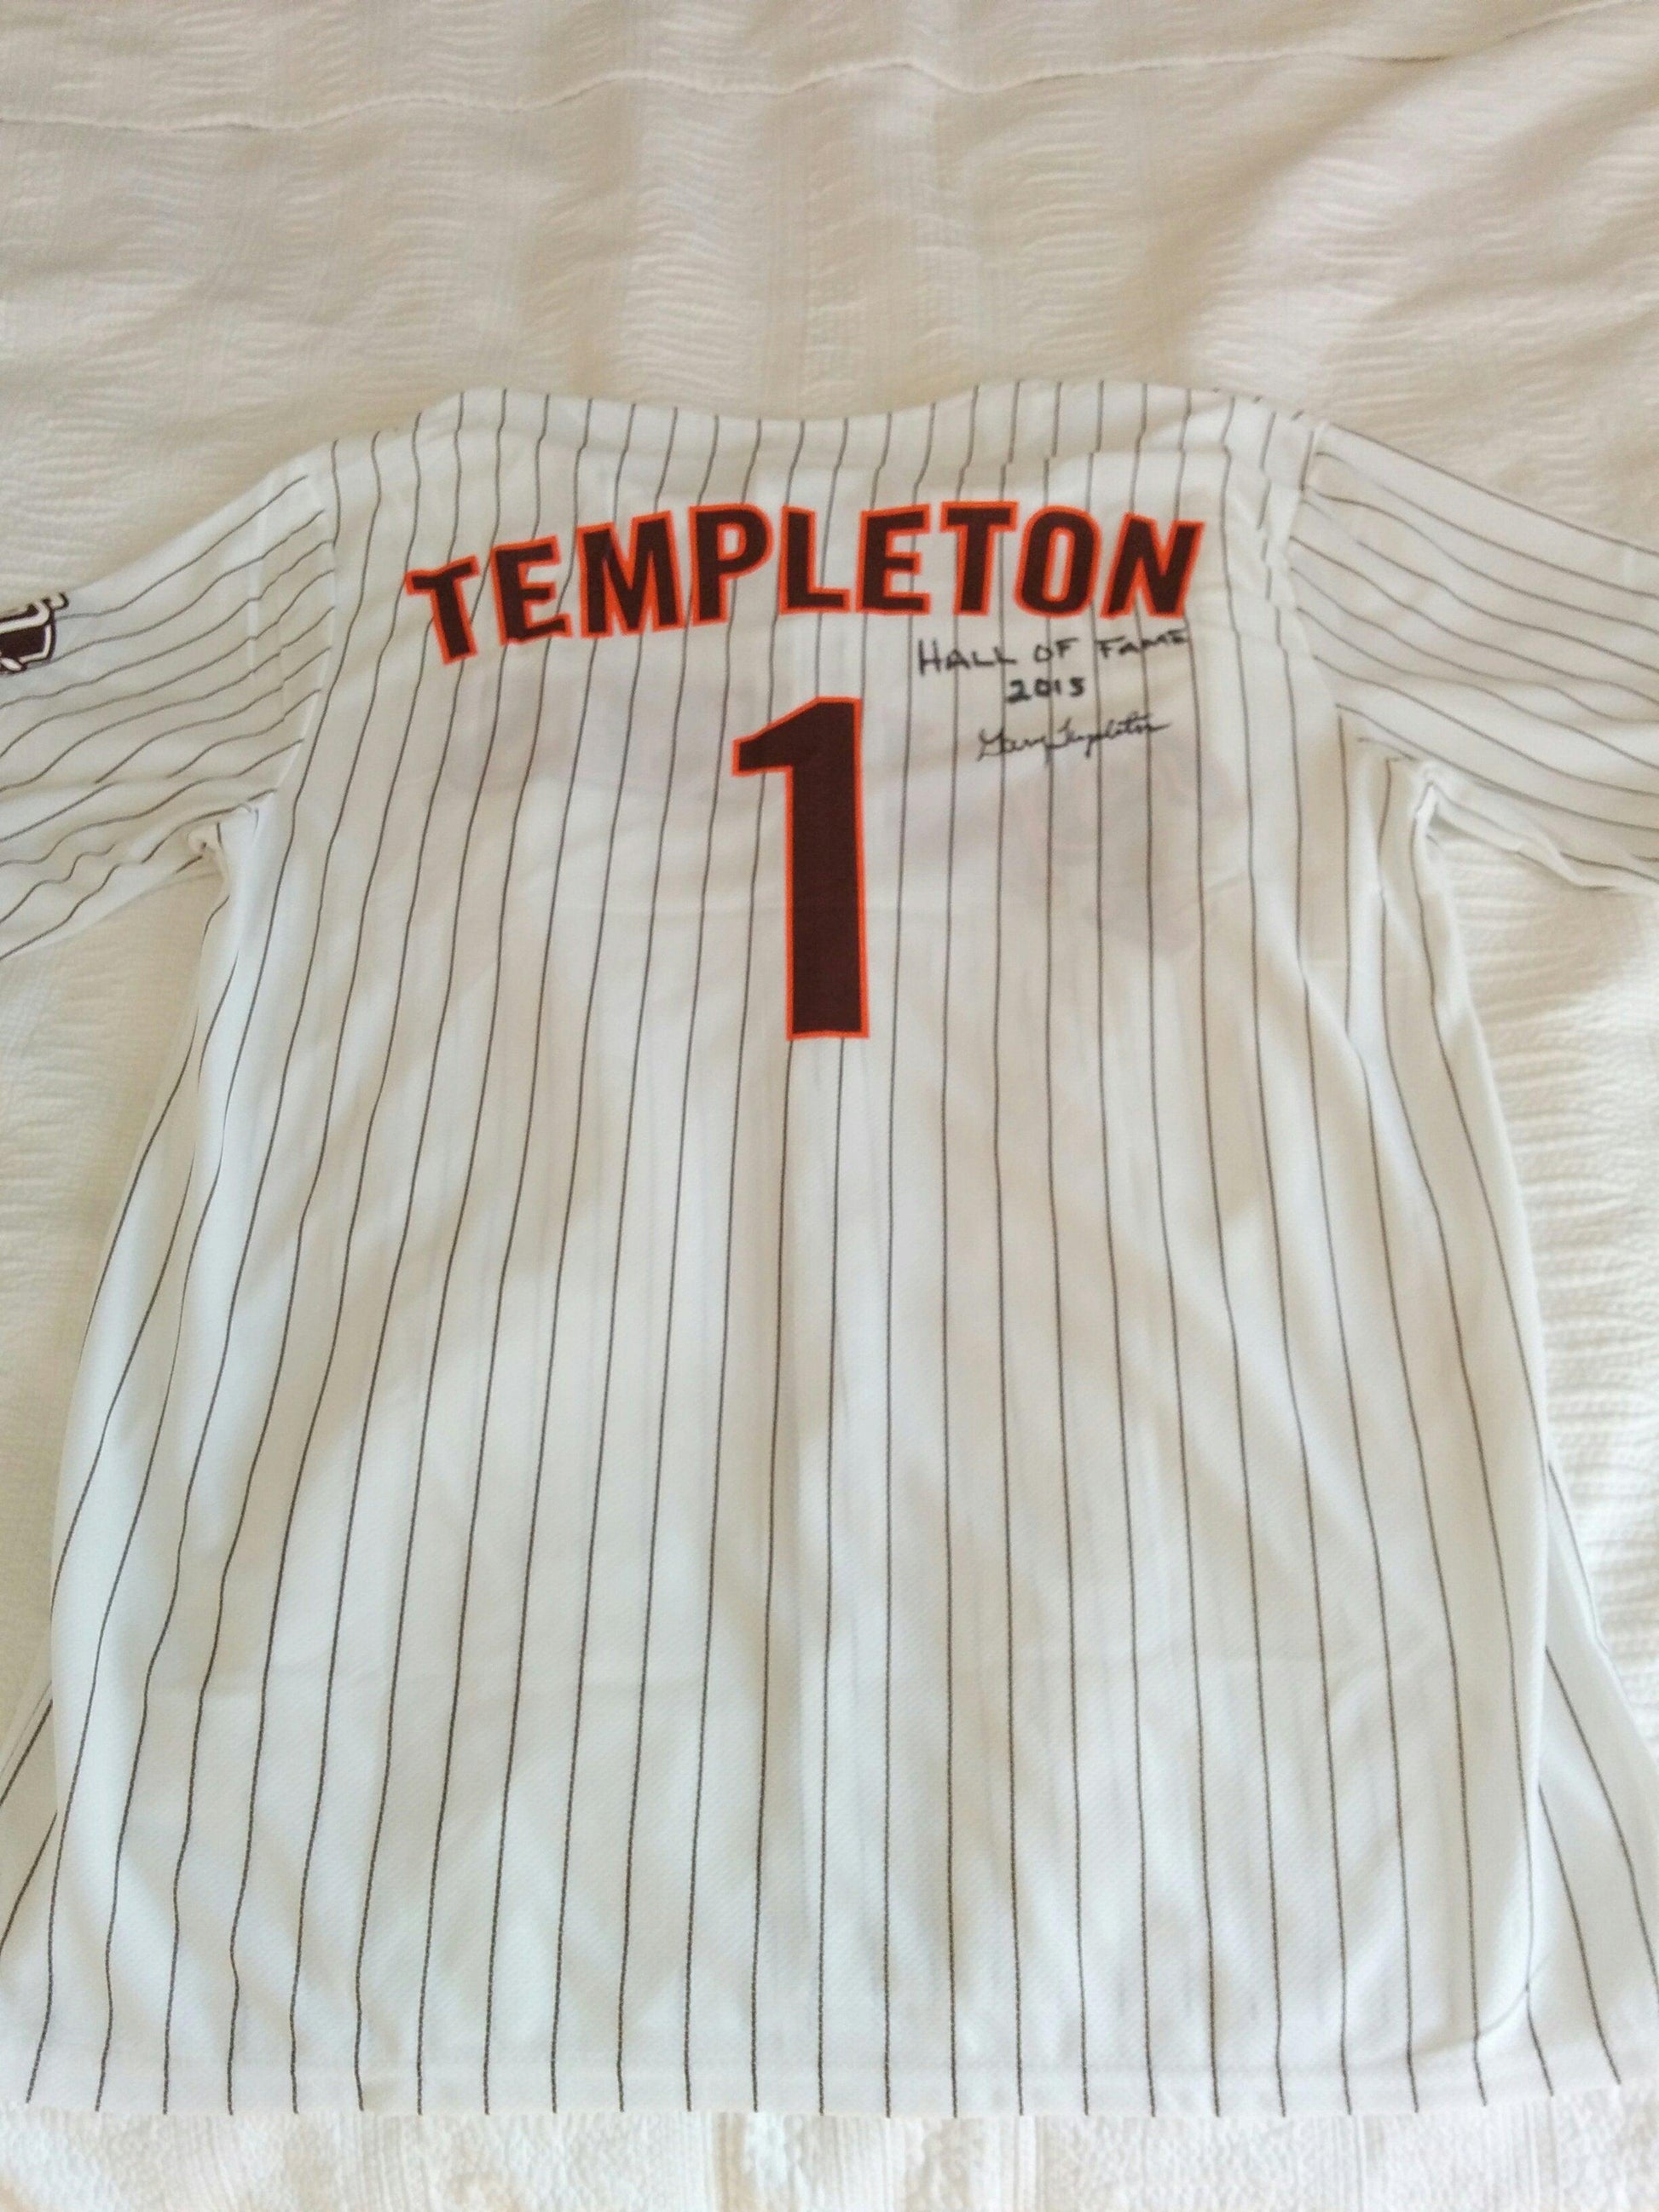 Gerry Templeton Signed Replica Padres Hall of Fame Jersey - PastPros